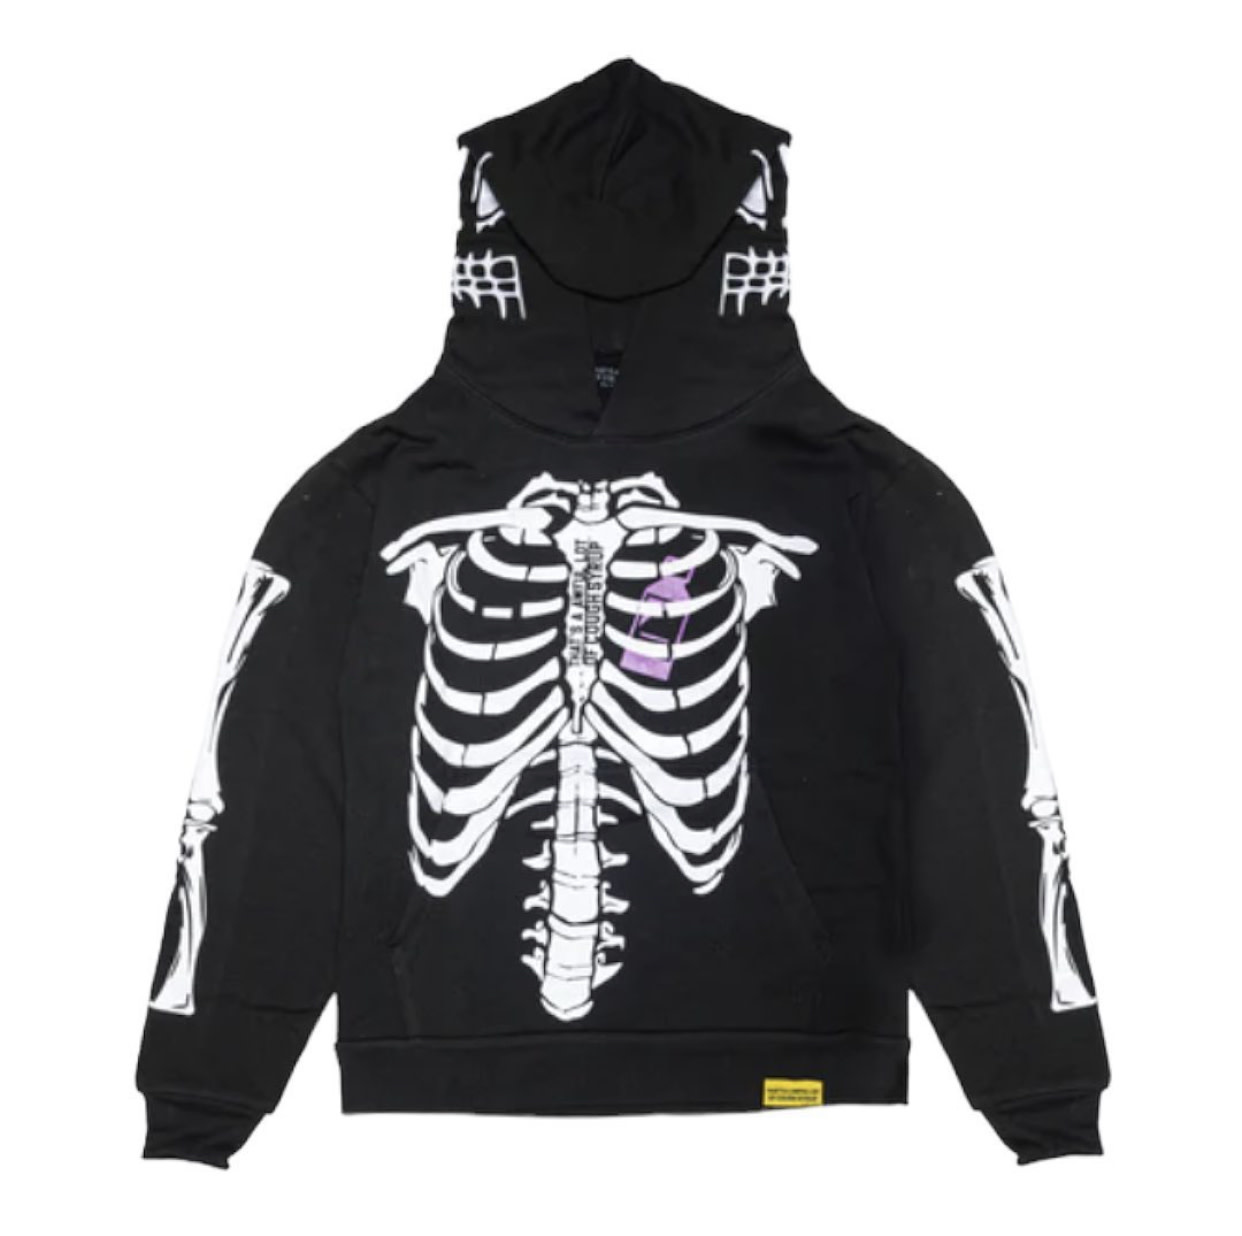 Cough Syrup Skeleton Hoodie - Private Stock